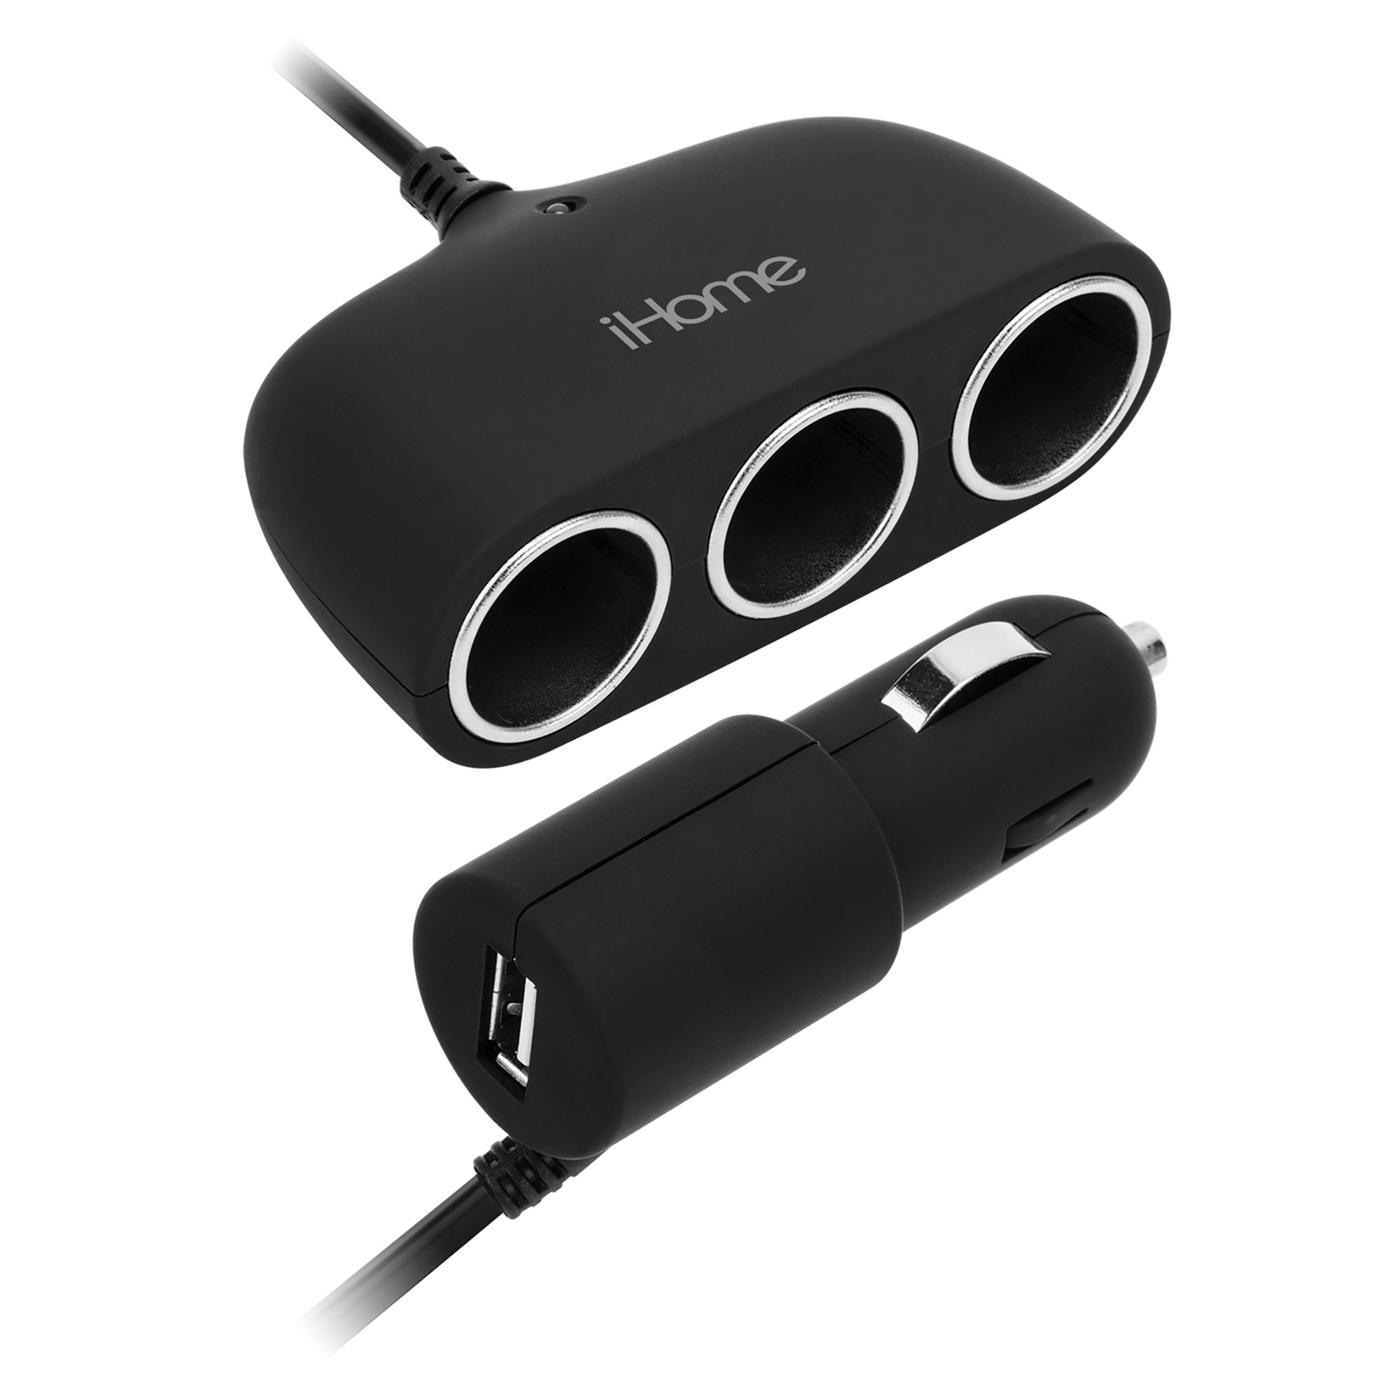 iHome Auto USB Car Charger - Black; image 2 of 2